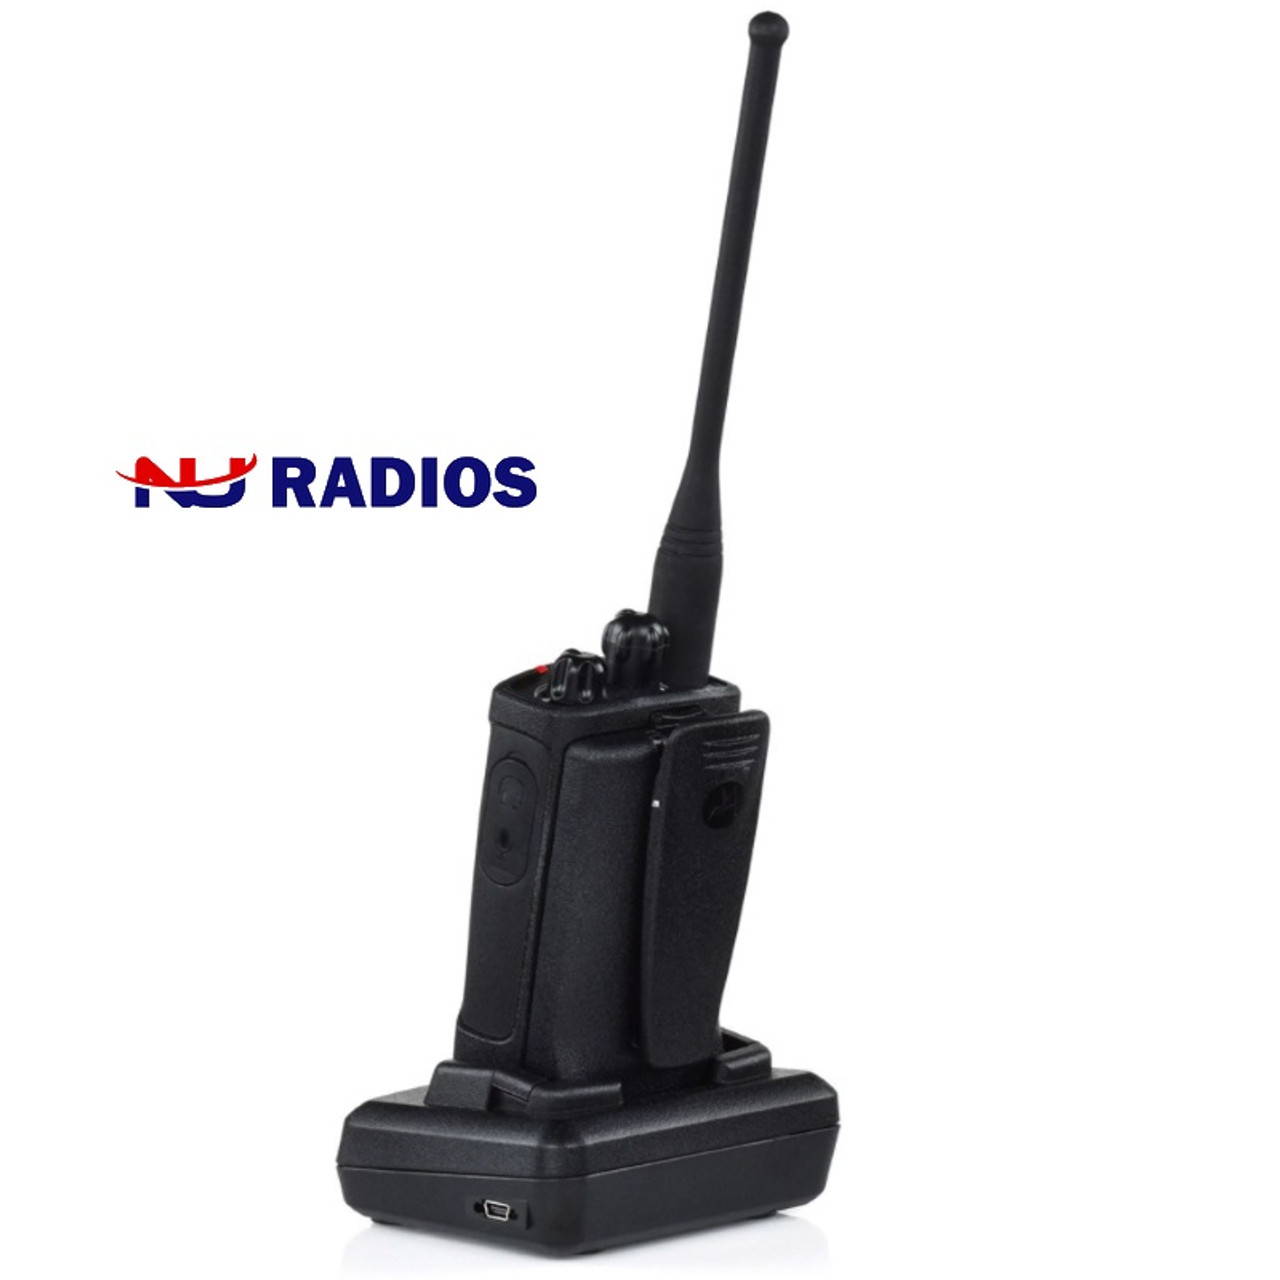 Motorola RDU4100 Watt Business 2-Way UHF Radio is just what you need.  This radios is a workhorse and gets the job done. Perfect for construction  sites, schools, large warehouses and malls.